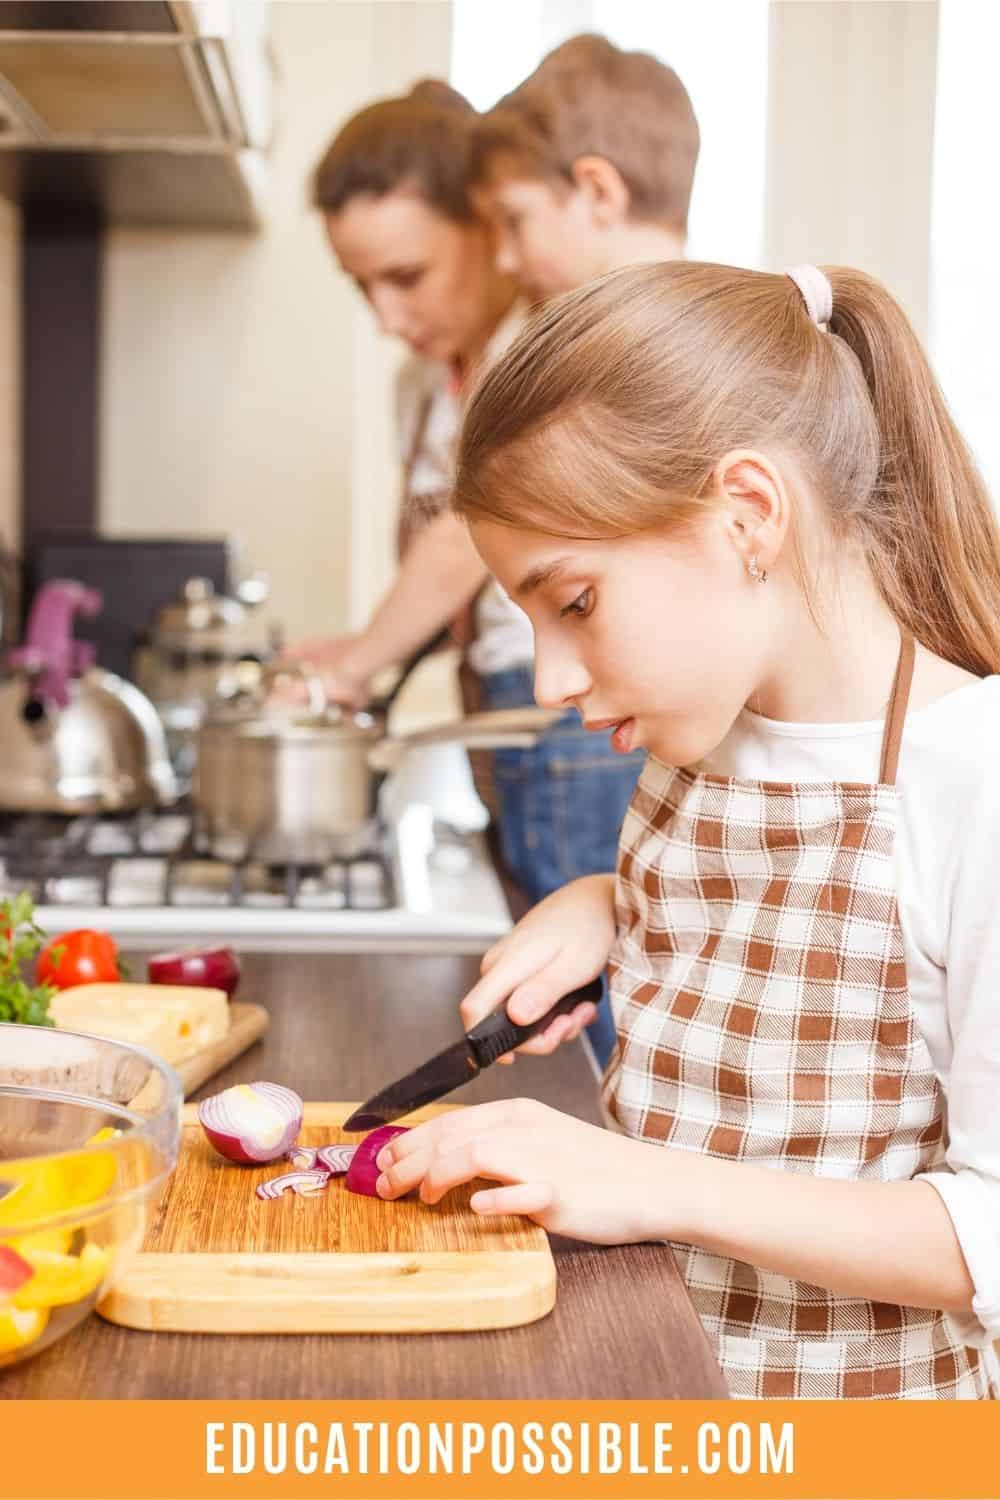 Tween girl cutting an onion on a cutting board while her mom and brother make something on the stove.